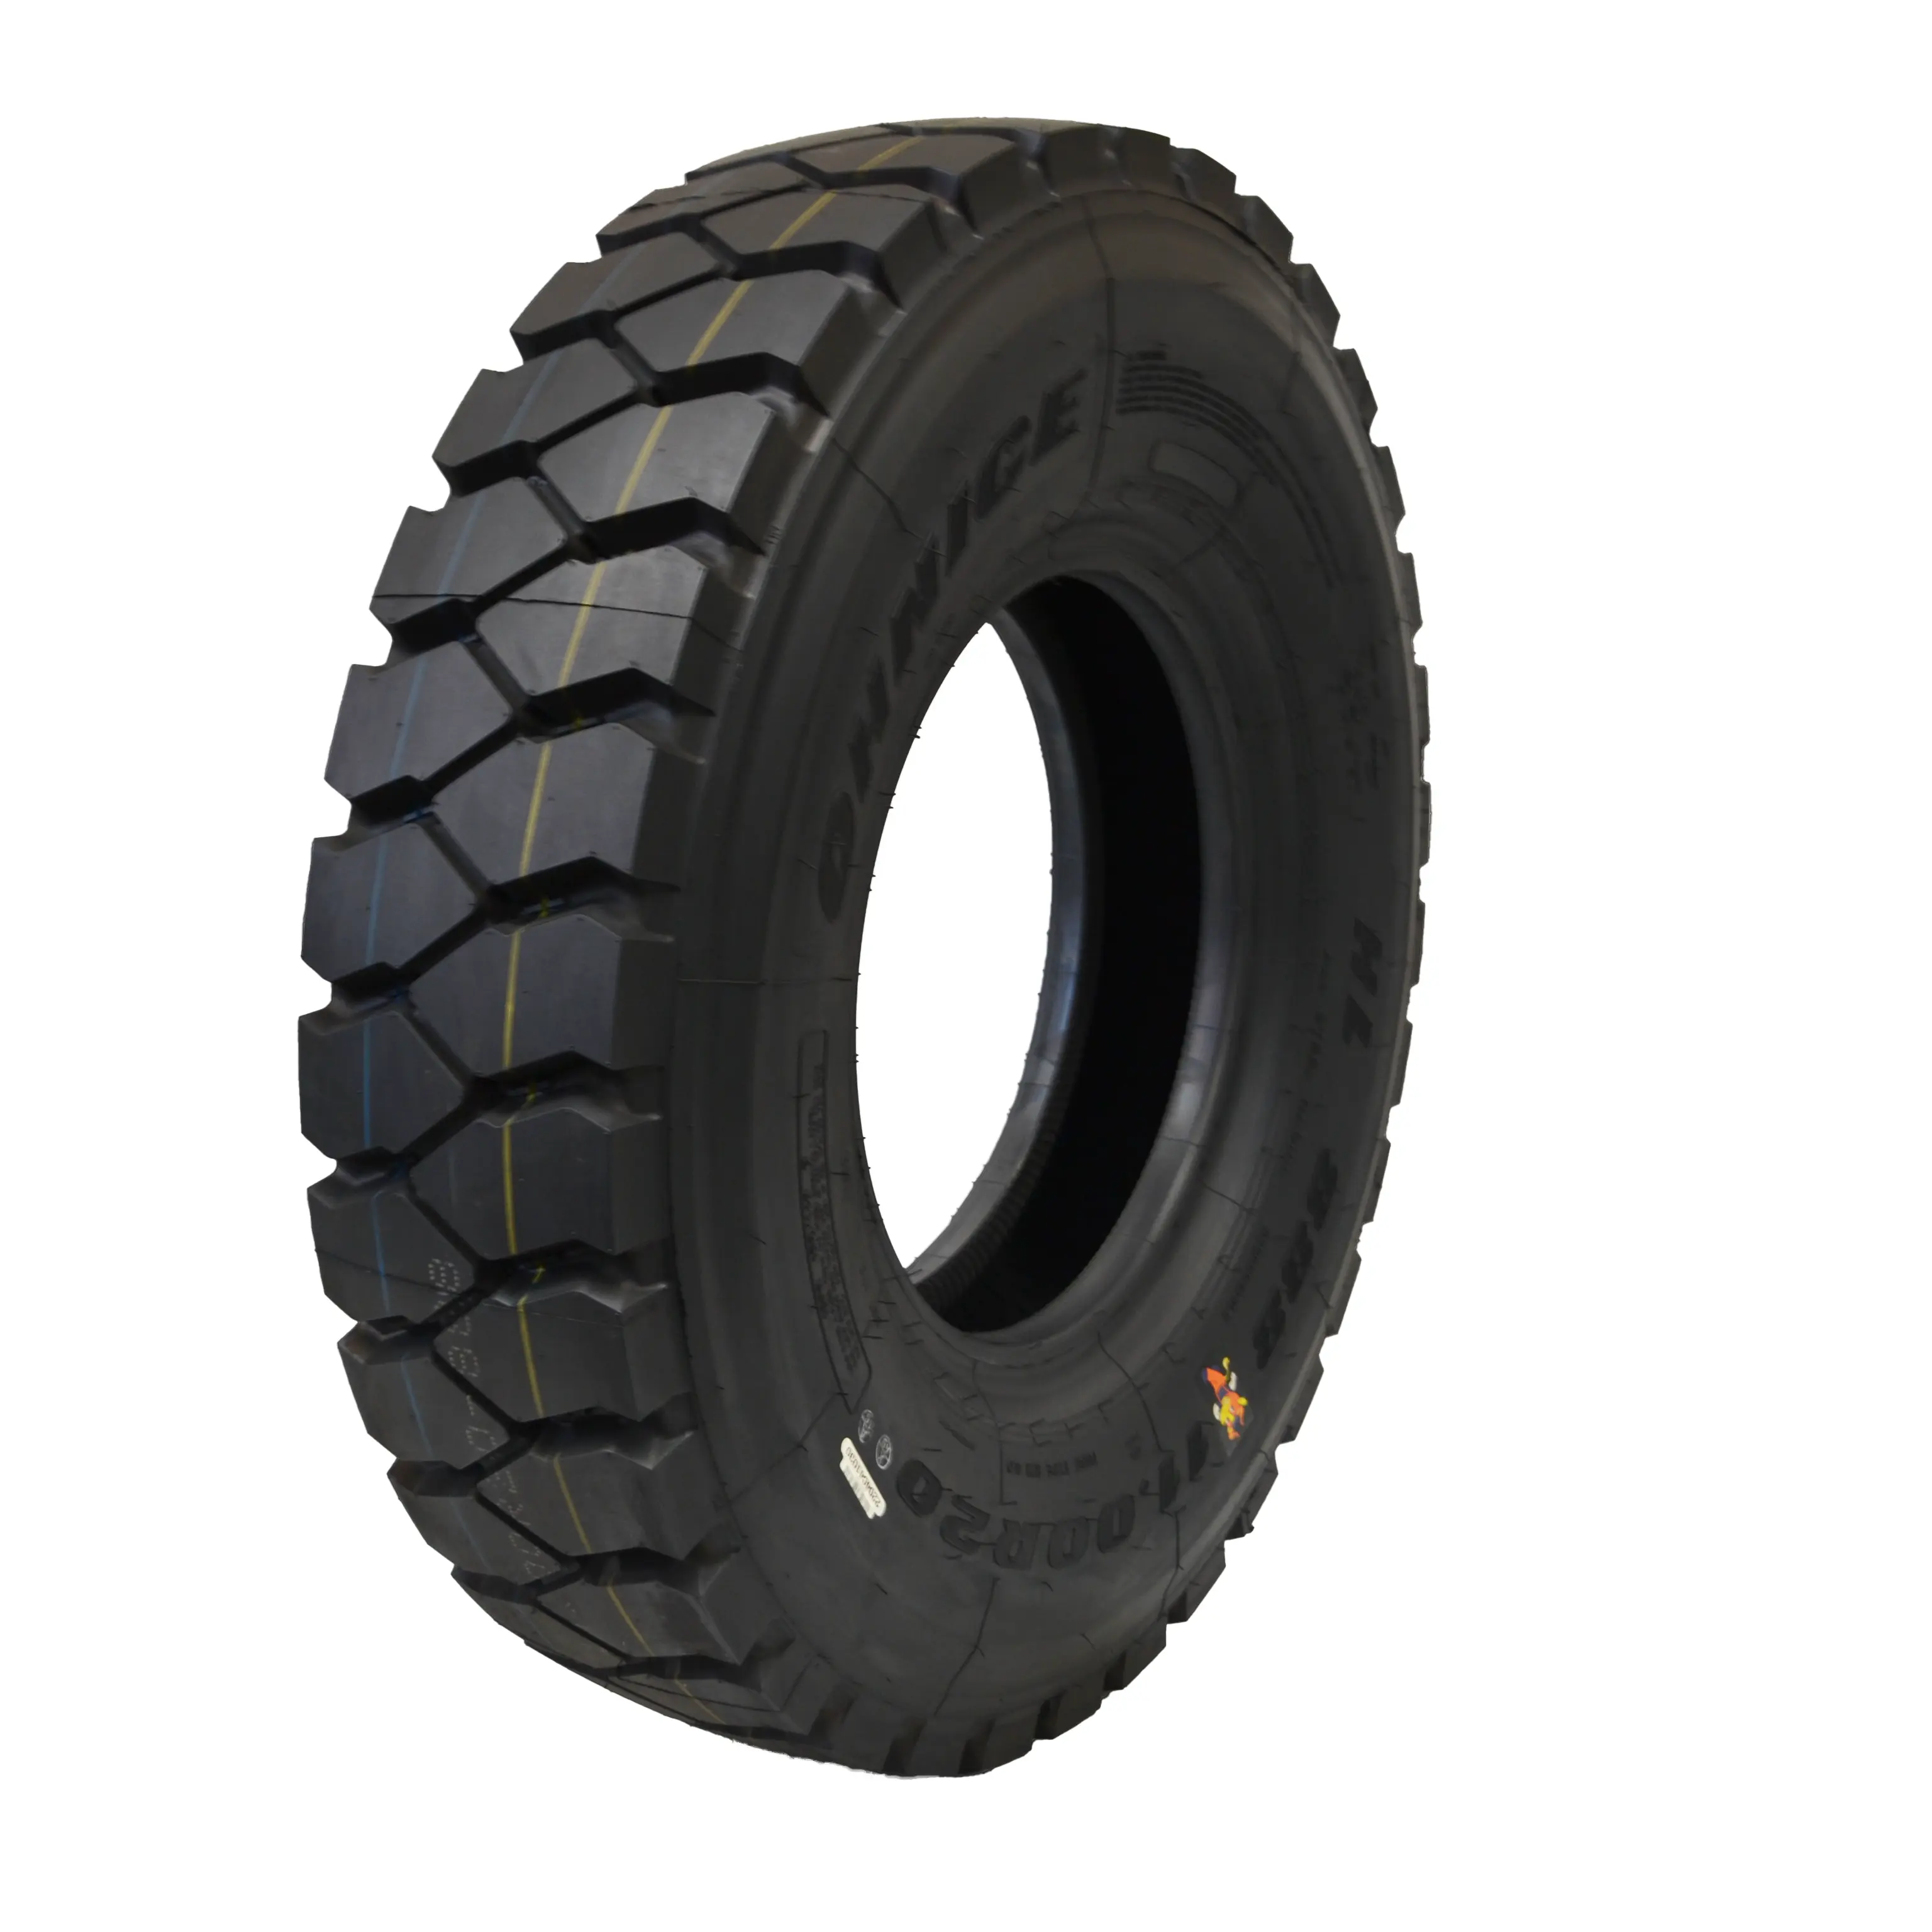 Truck TYRE 11.00R20 20PR WITH TUBE AND FLAP Heavy Load